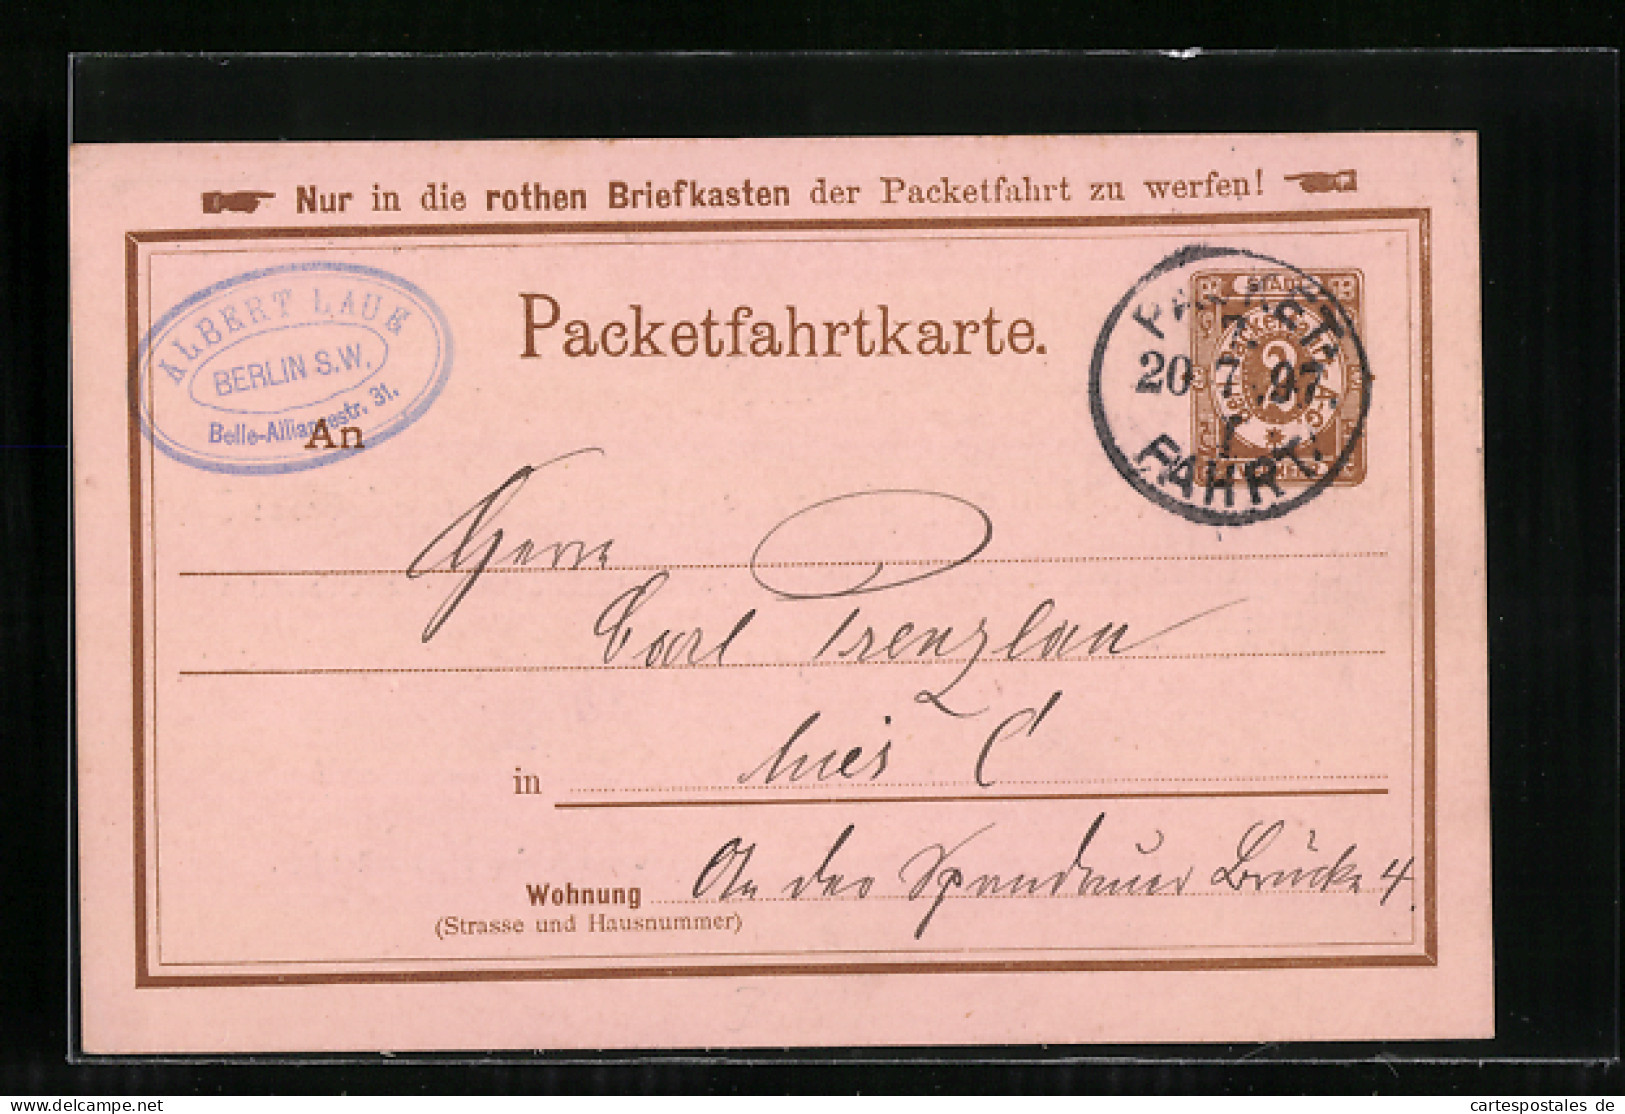 AK Berlin, Packetfahrtkarte, Private Stadtpost Berliner Packetfahrt AG  - Stamps (pictures)